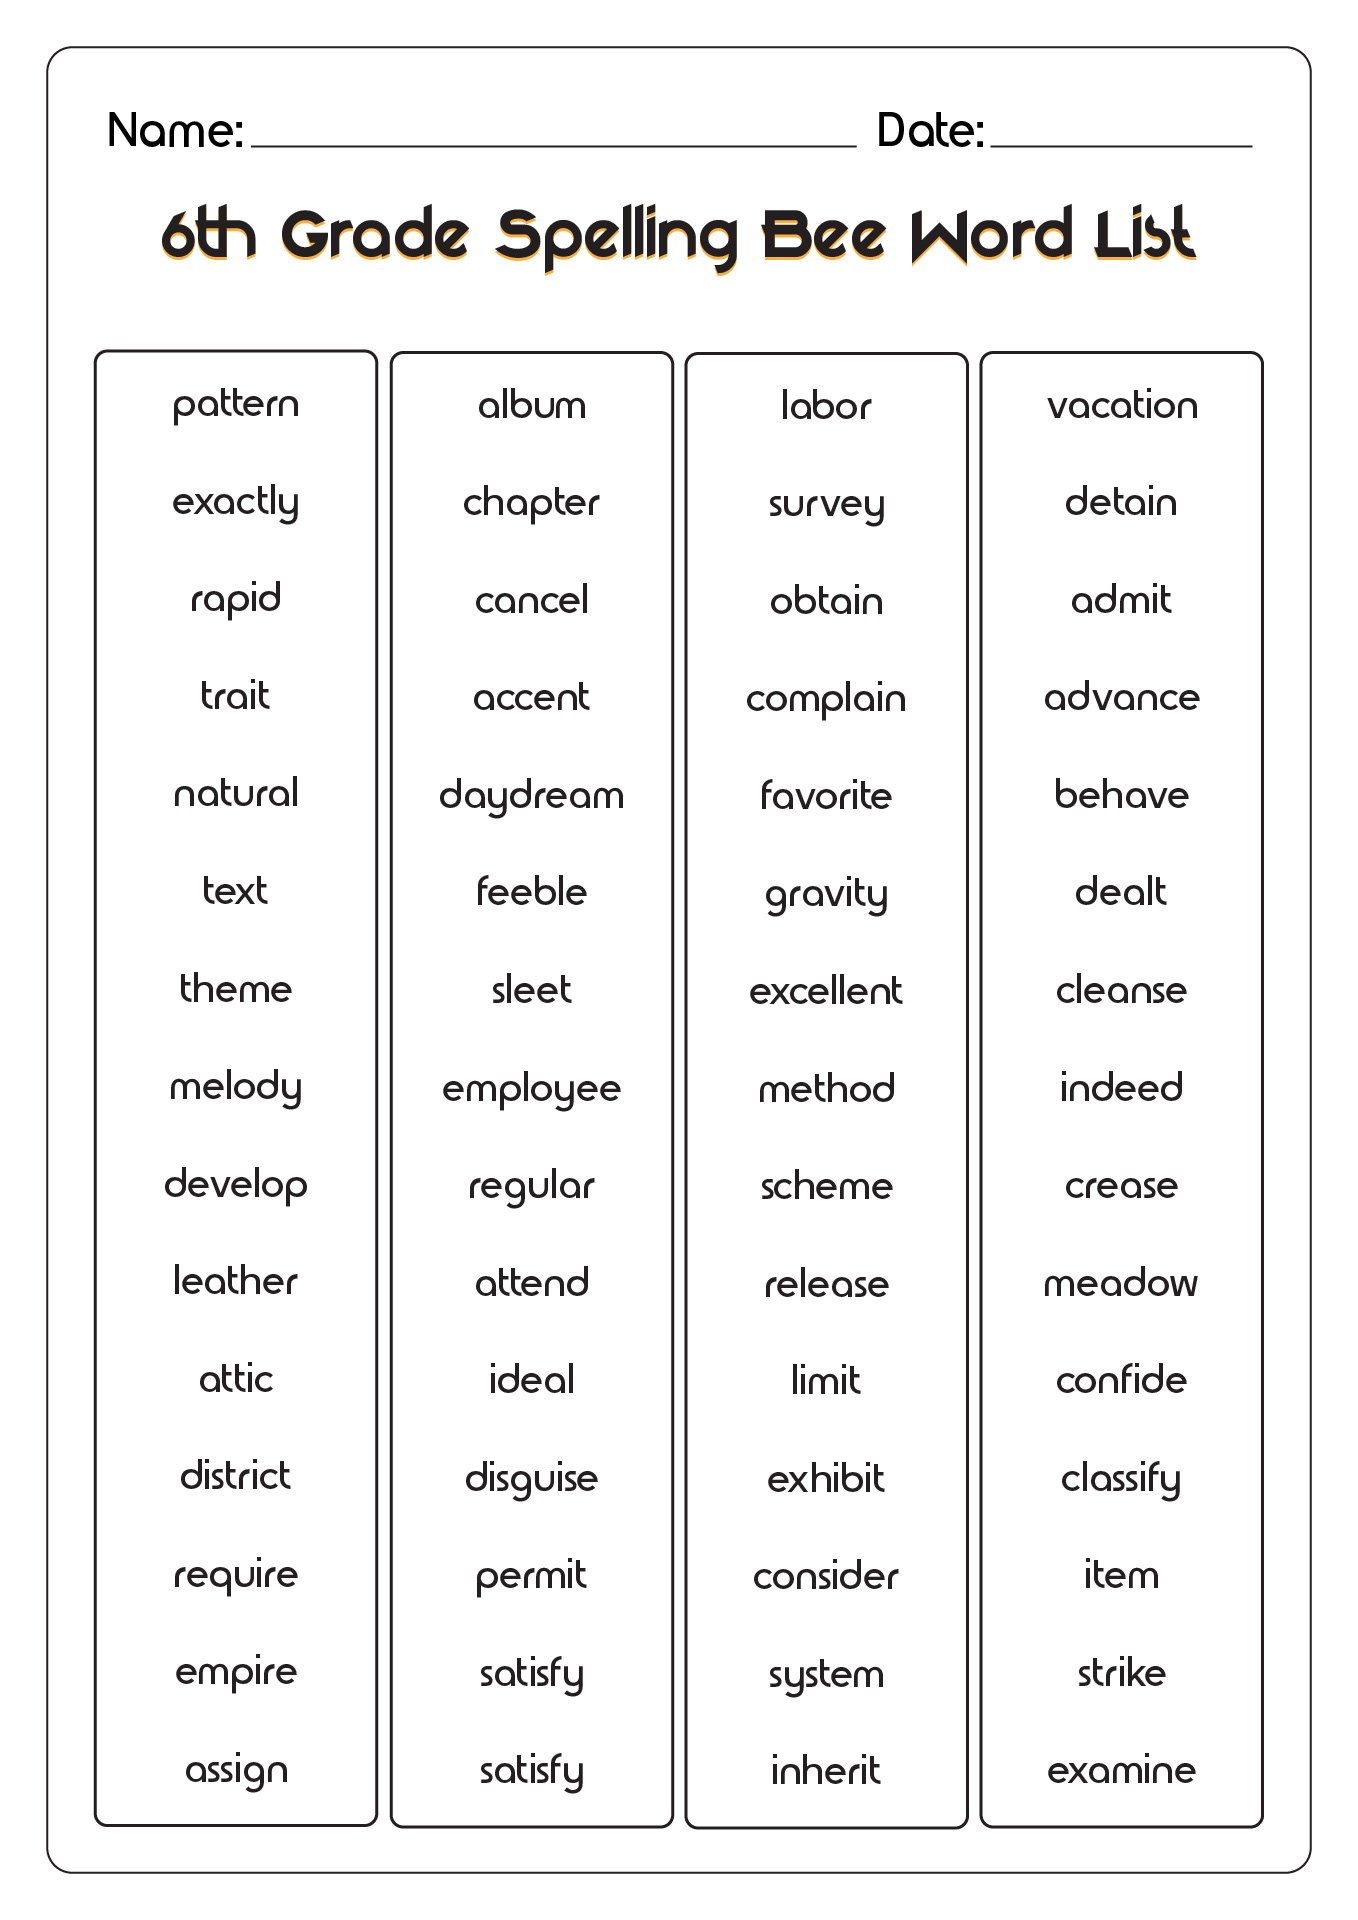 6th Grade Spelling Word Lists